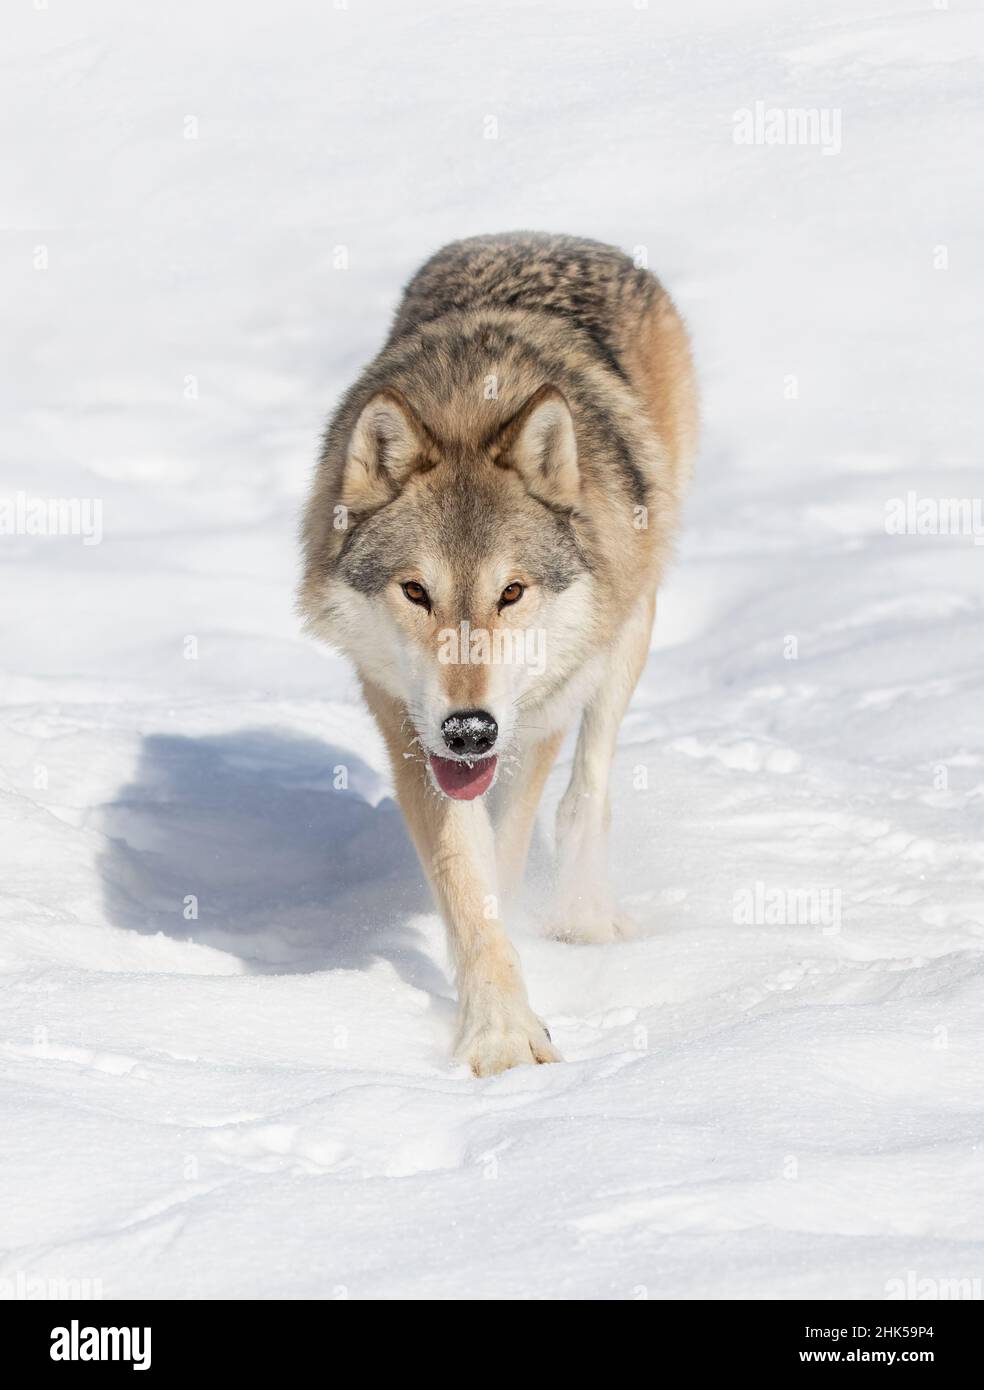 Tundra Wolf (Canis lupus albus) walking in the winter snow with the mountains in the background Stock Photo